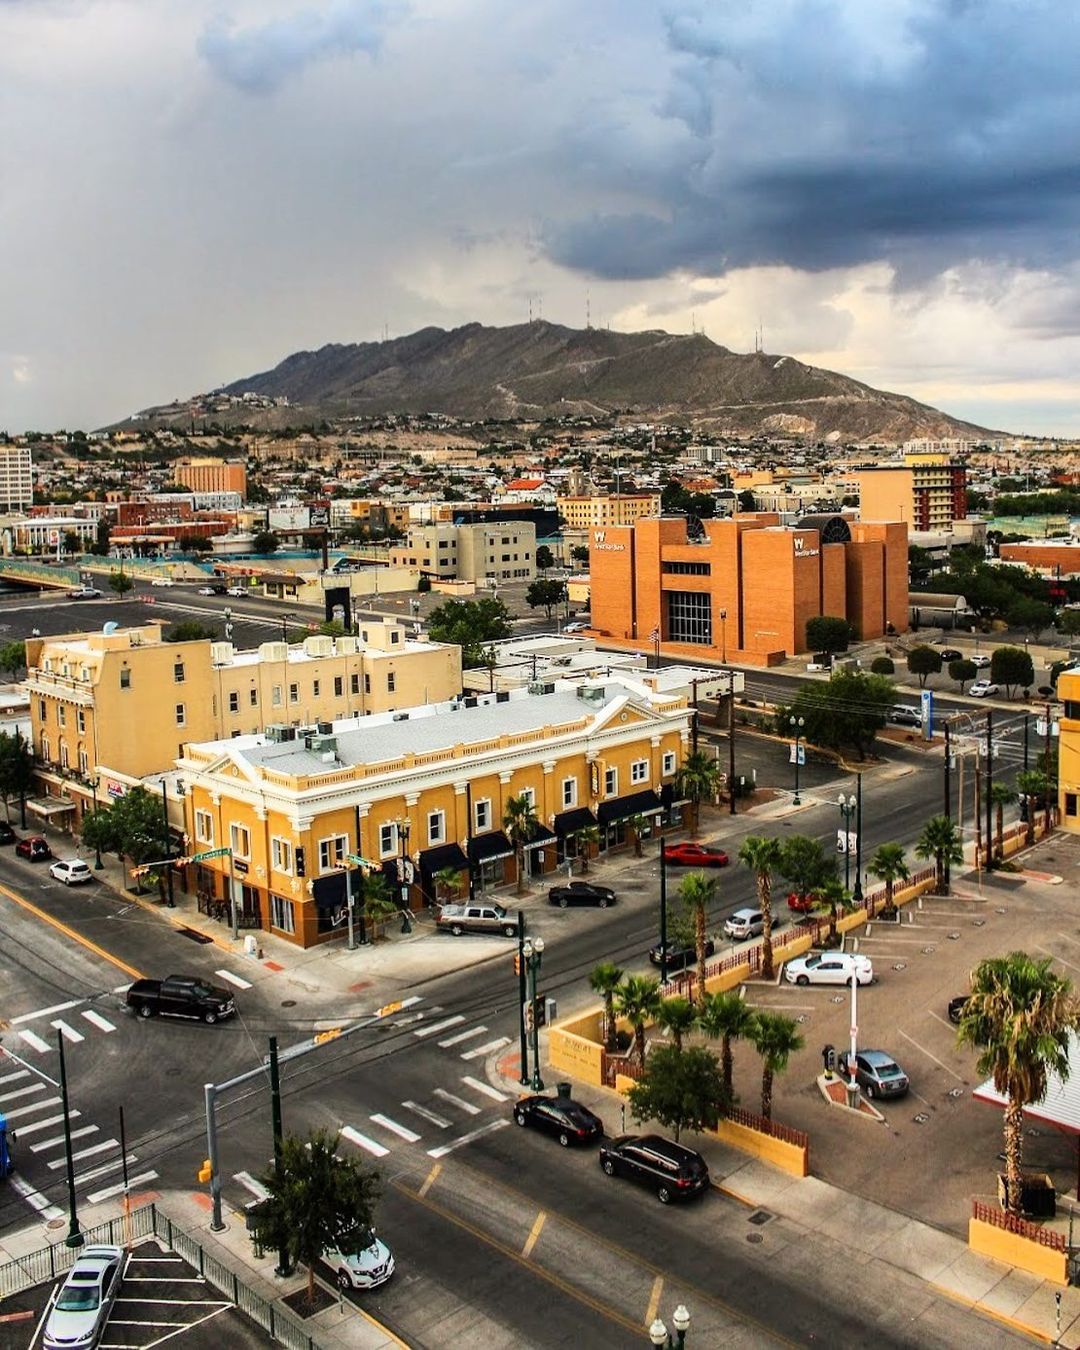 View of Downtown El Paso, TX. Photo by Instagram user @seiriosobscura